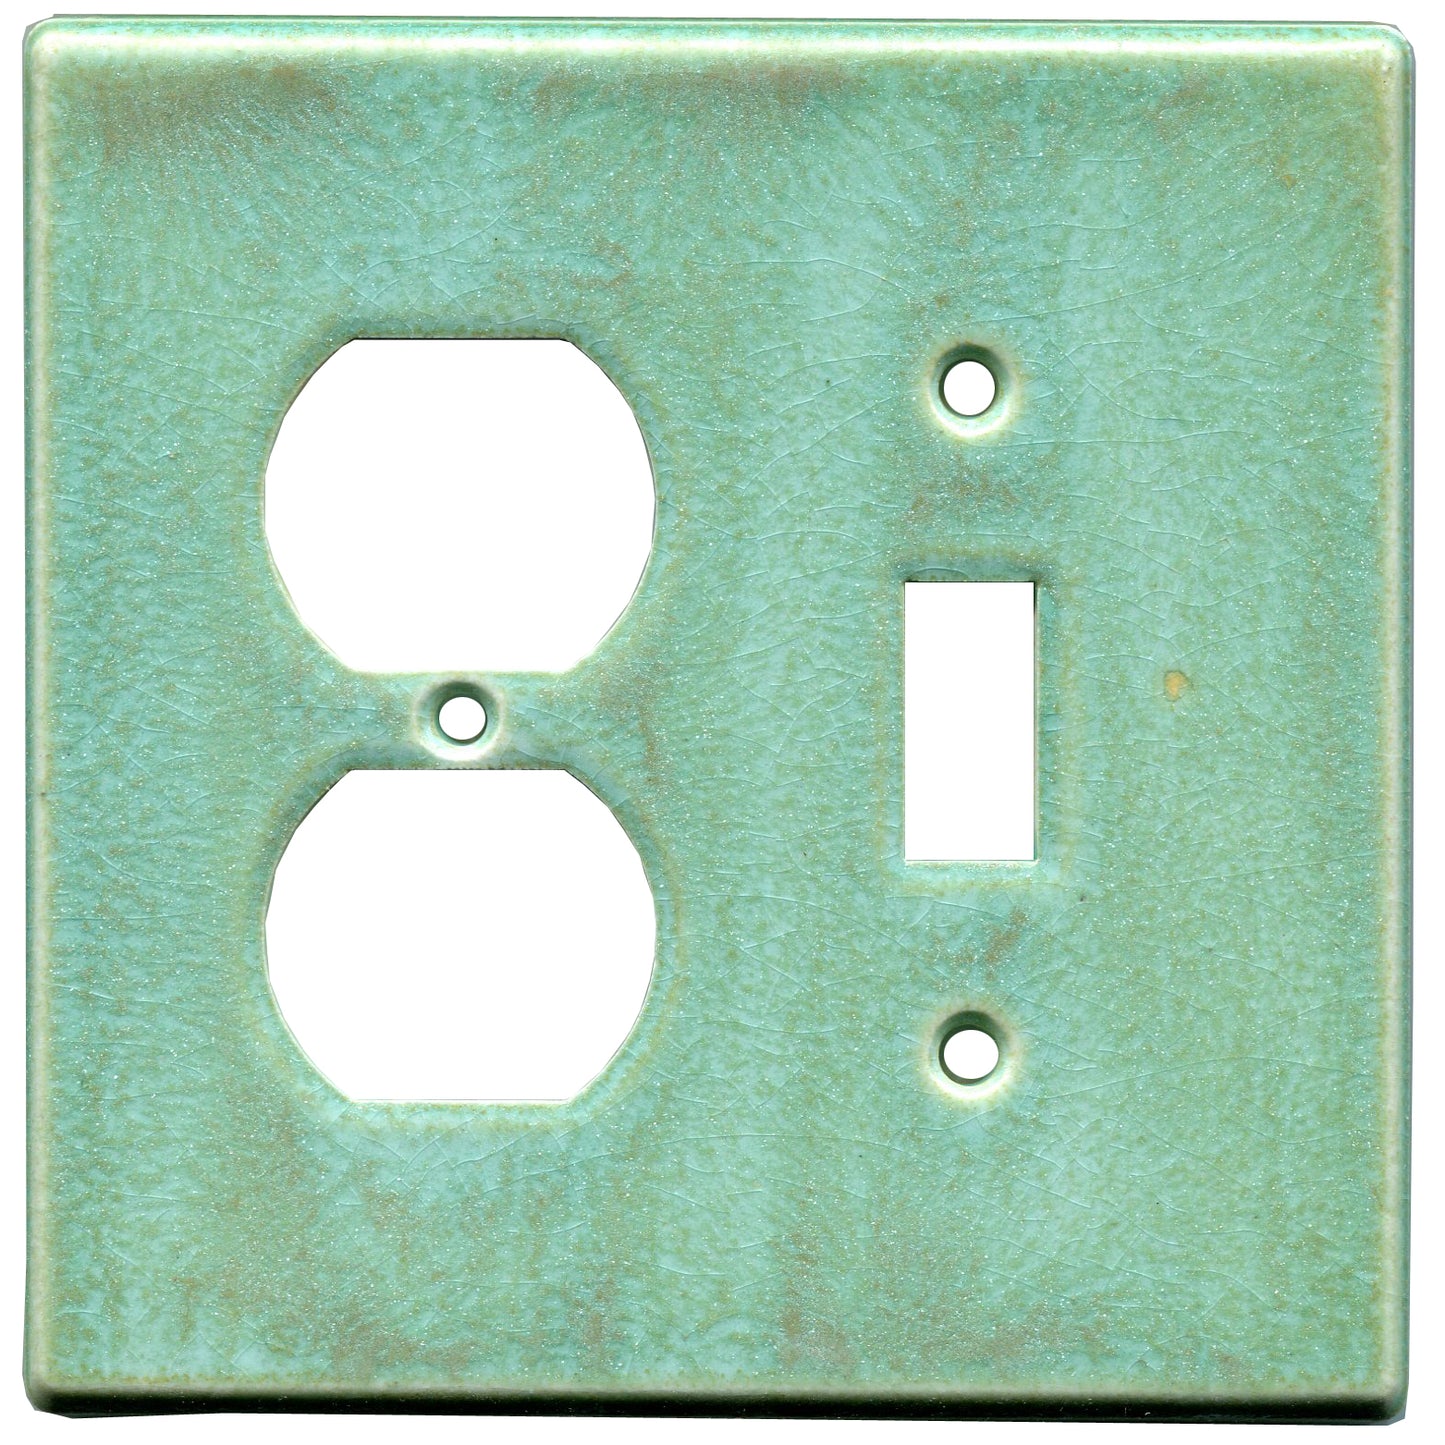 Crystallized Avocado outle/GFI combo Ceramic Switch Plate 